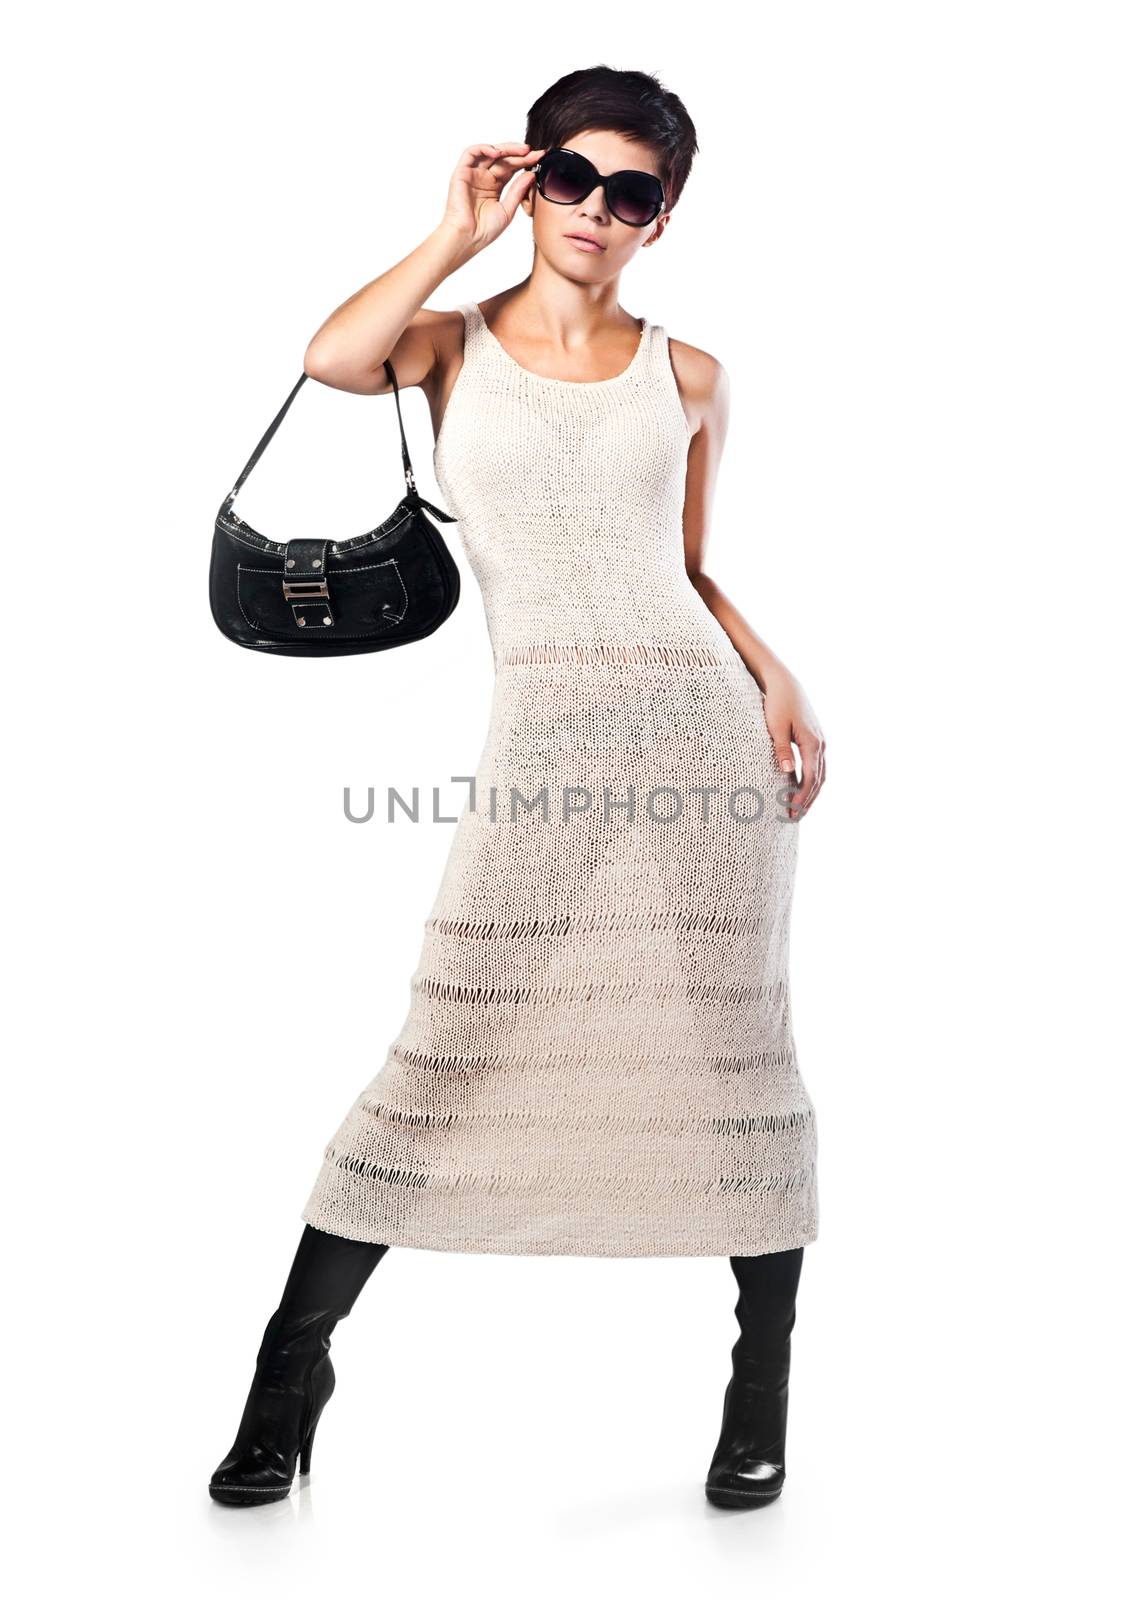 Fashion girl in a beautiful dress in the studio on a gray background